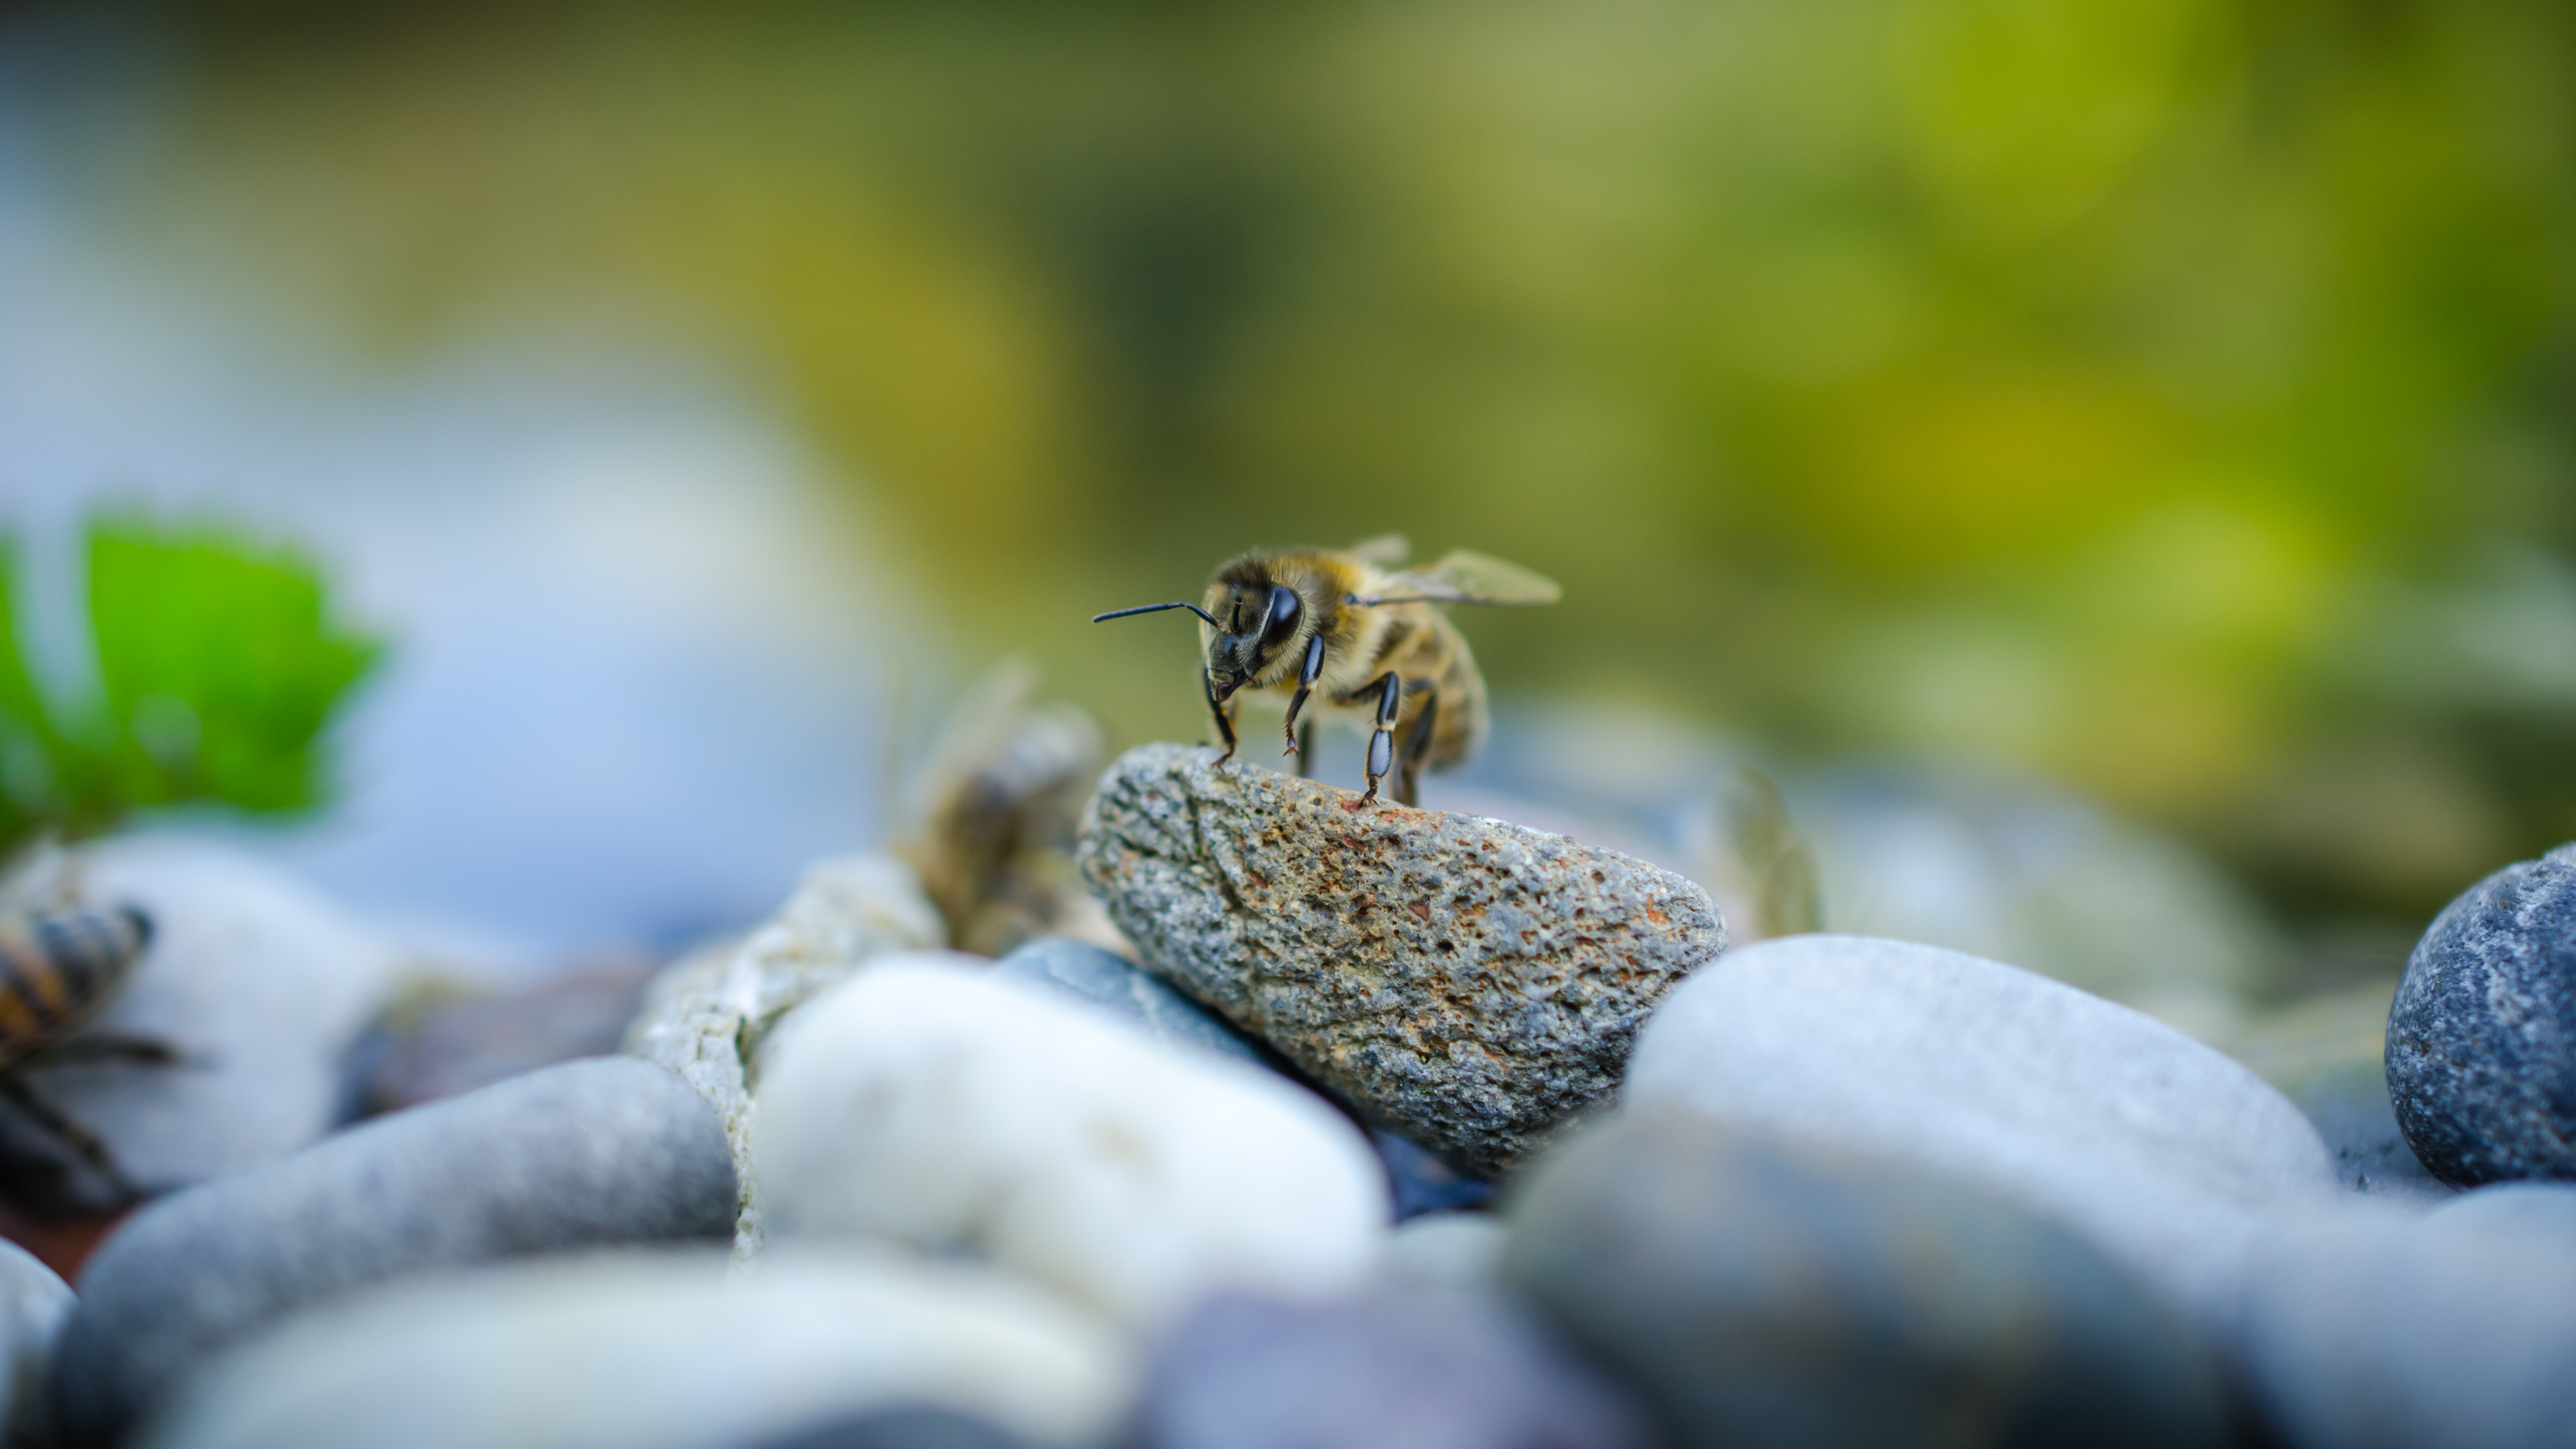 General 4916x2765 nature animals stones macro bees insect